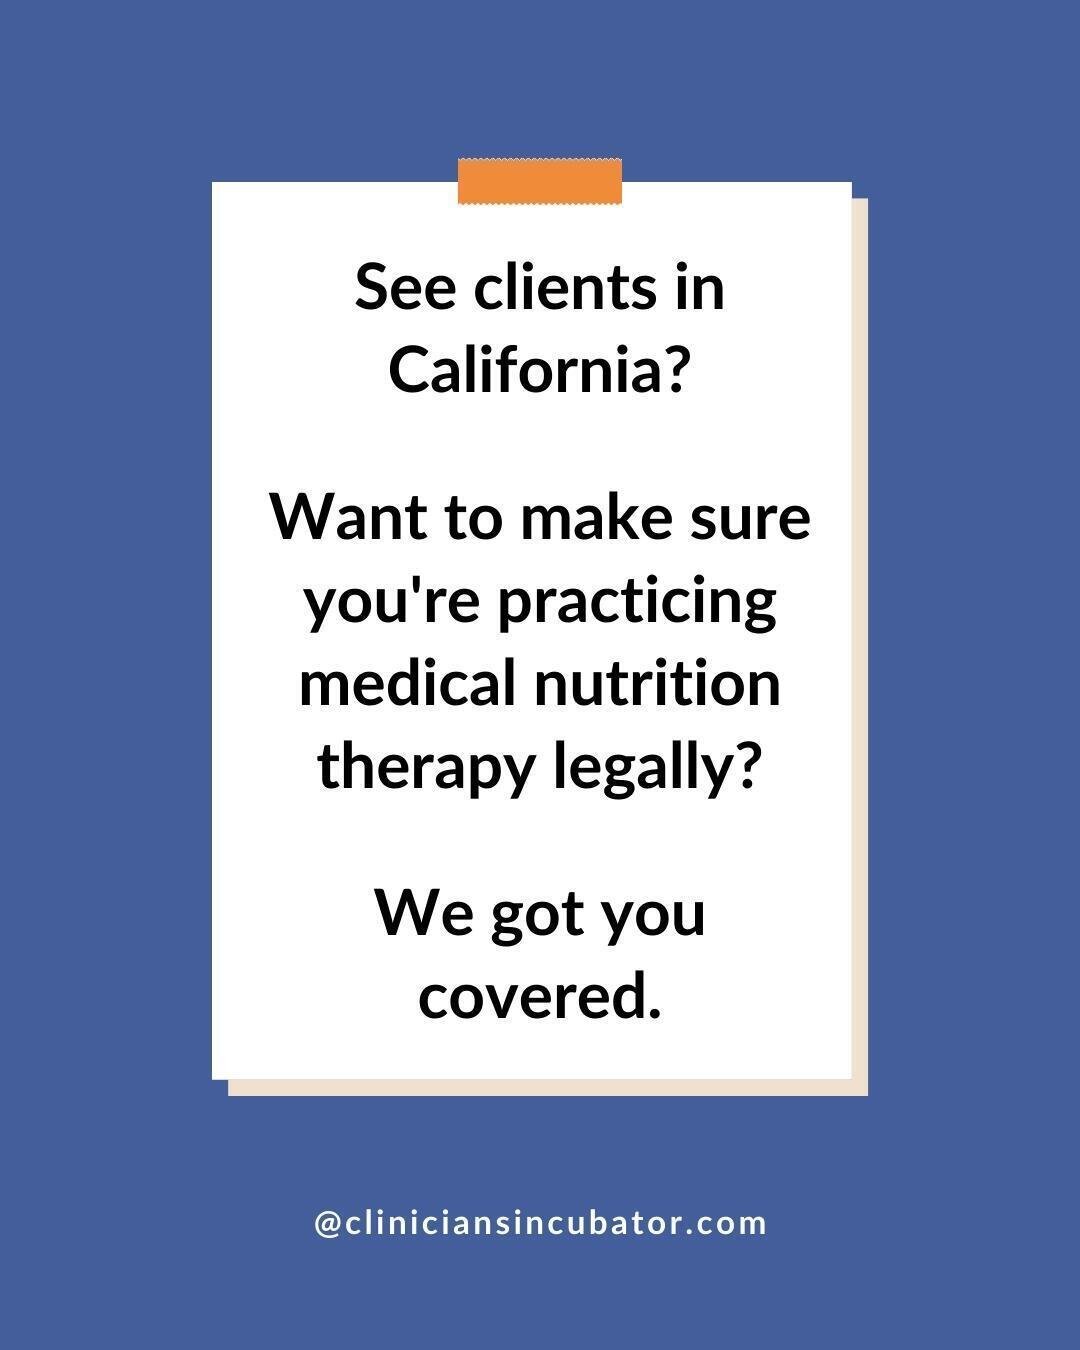 If you're ever planning on seeing clients in California, you don't want to miss this informational webinar discussing how to manage the legal requirements to provide medical nutrition therapy with CNS Supervisor Alyson Roux.

Wednesday, May 10, 10:00